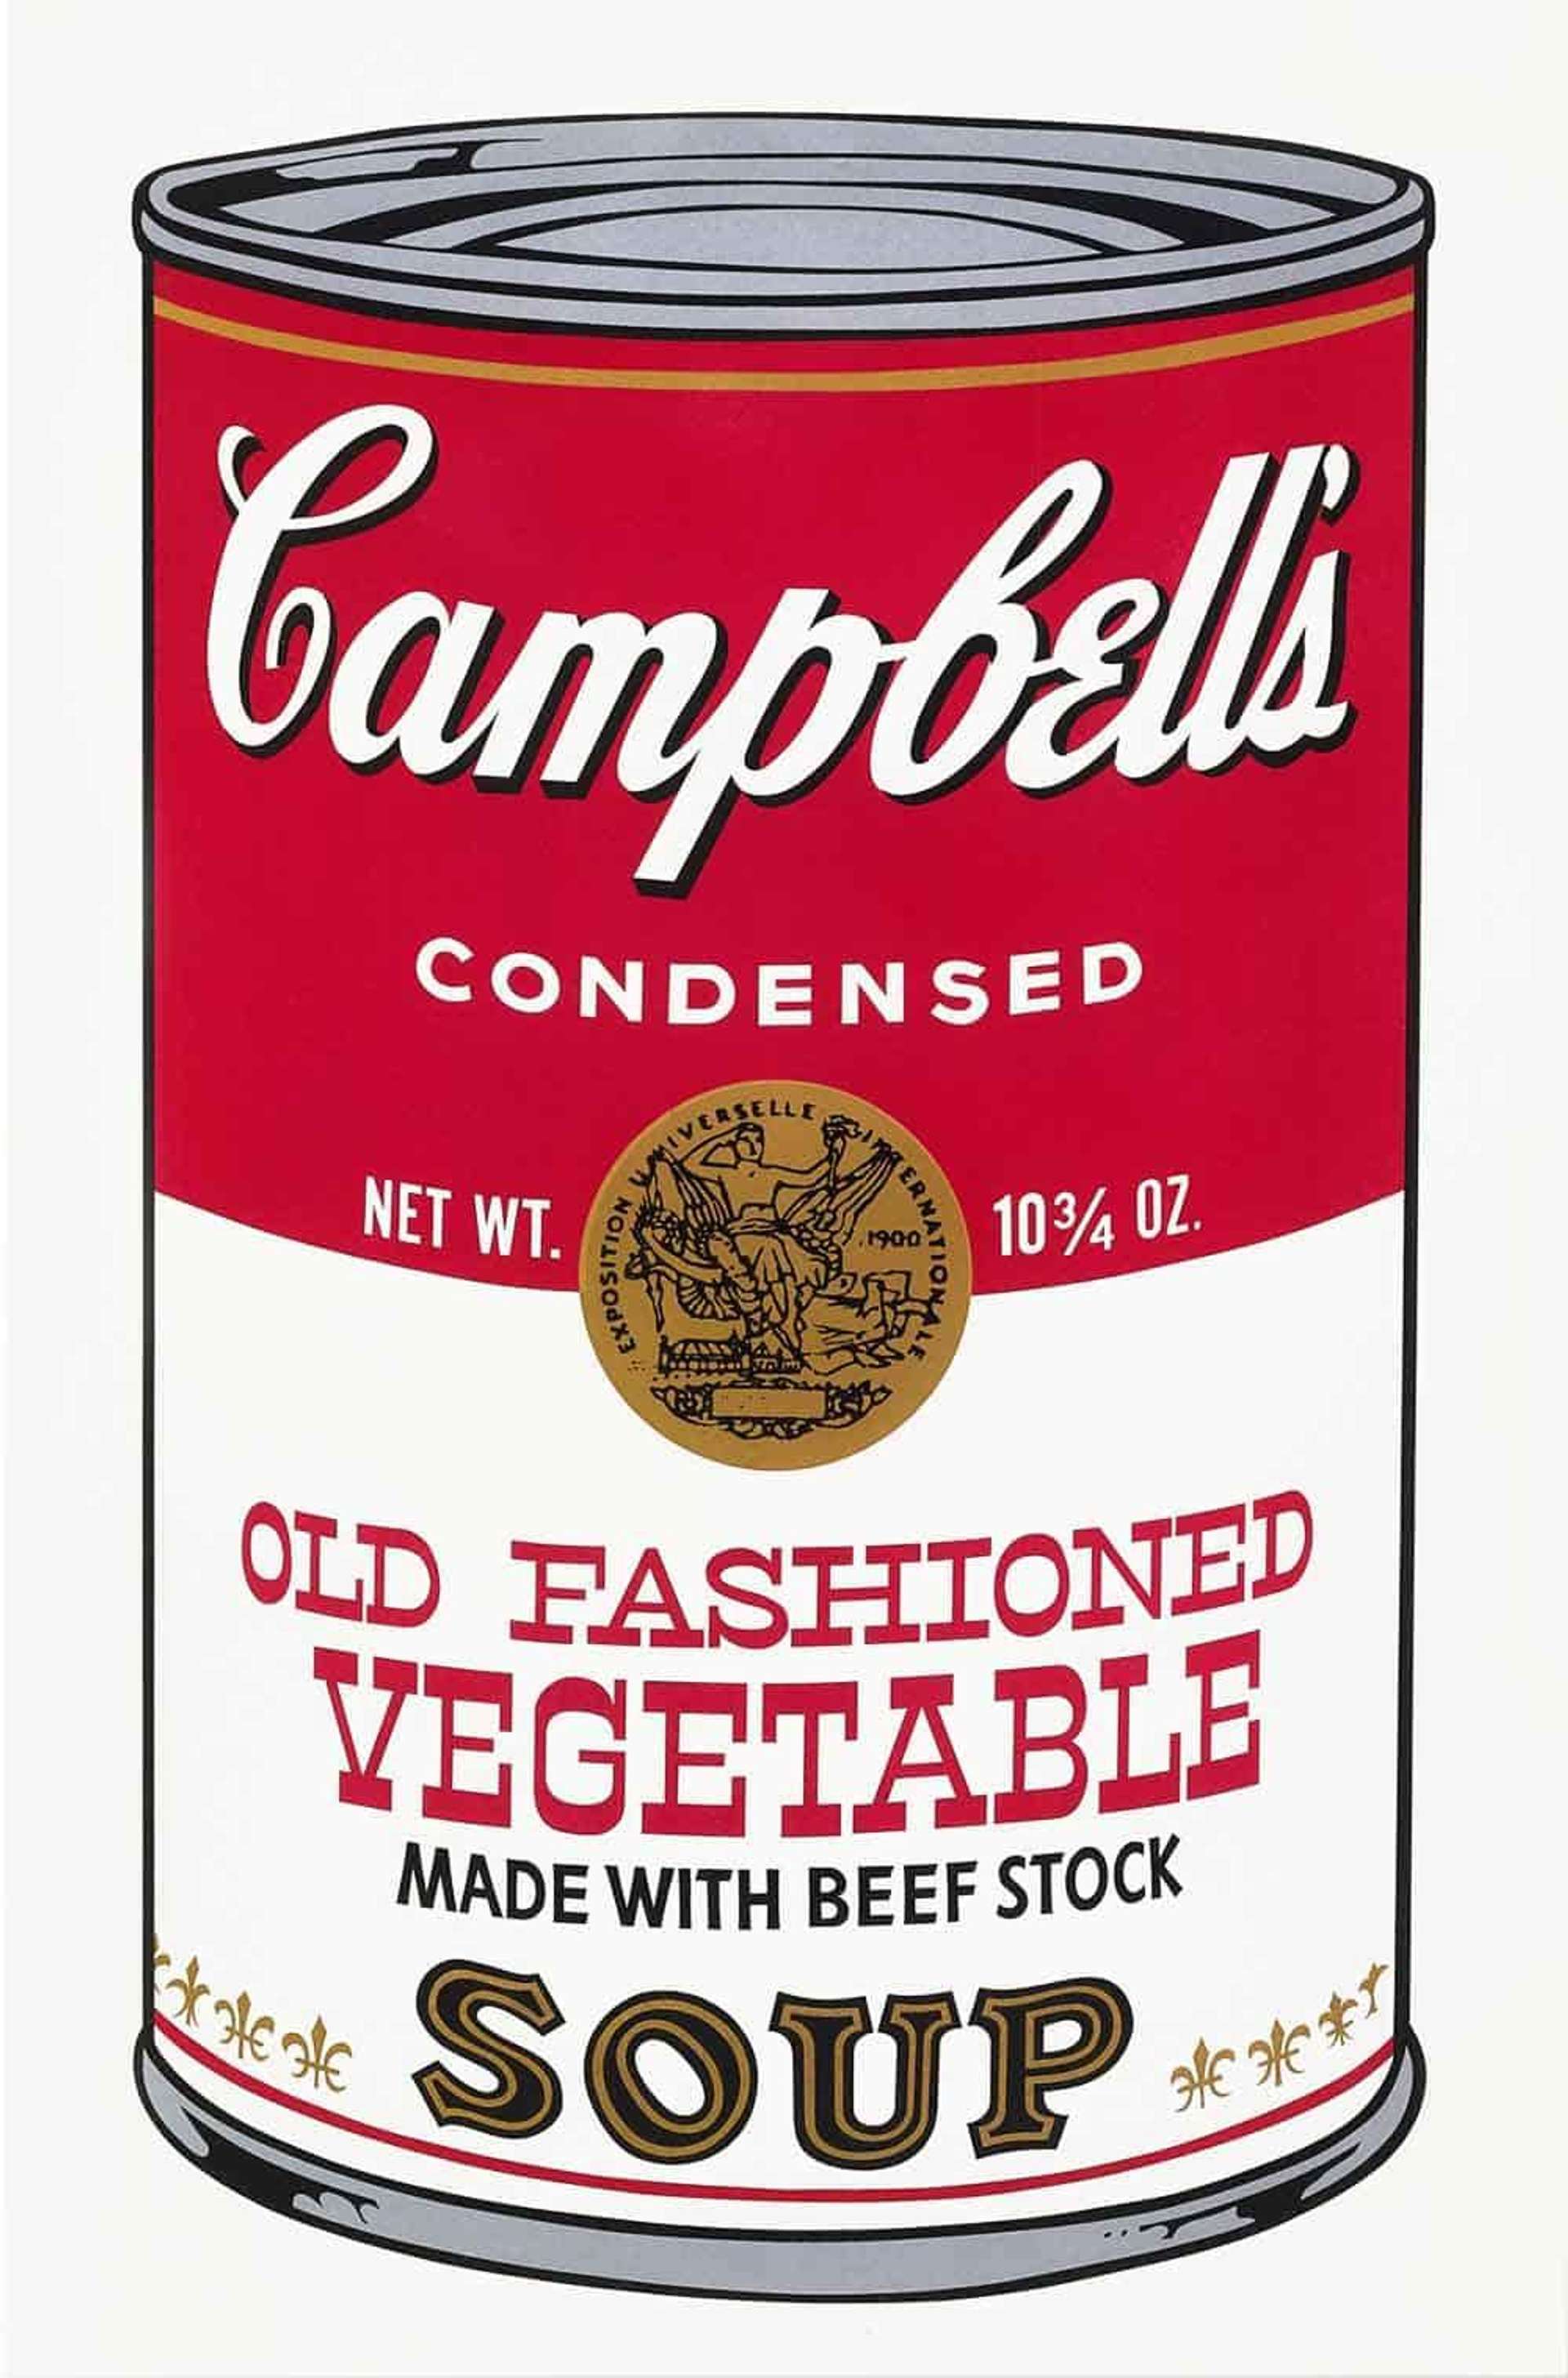 Campbell's Soup II, Old Fashioned Vegetable (F. & S. II.54) - Signed Print by Andy Warhol 1969 - MyArtBroker